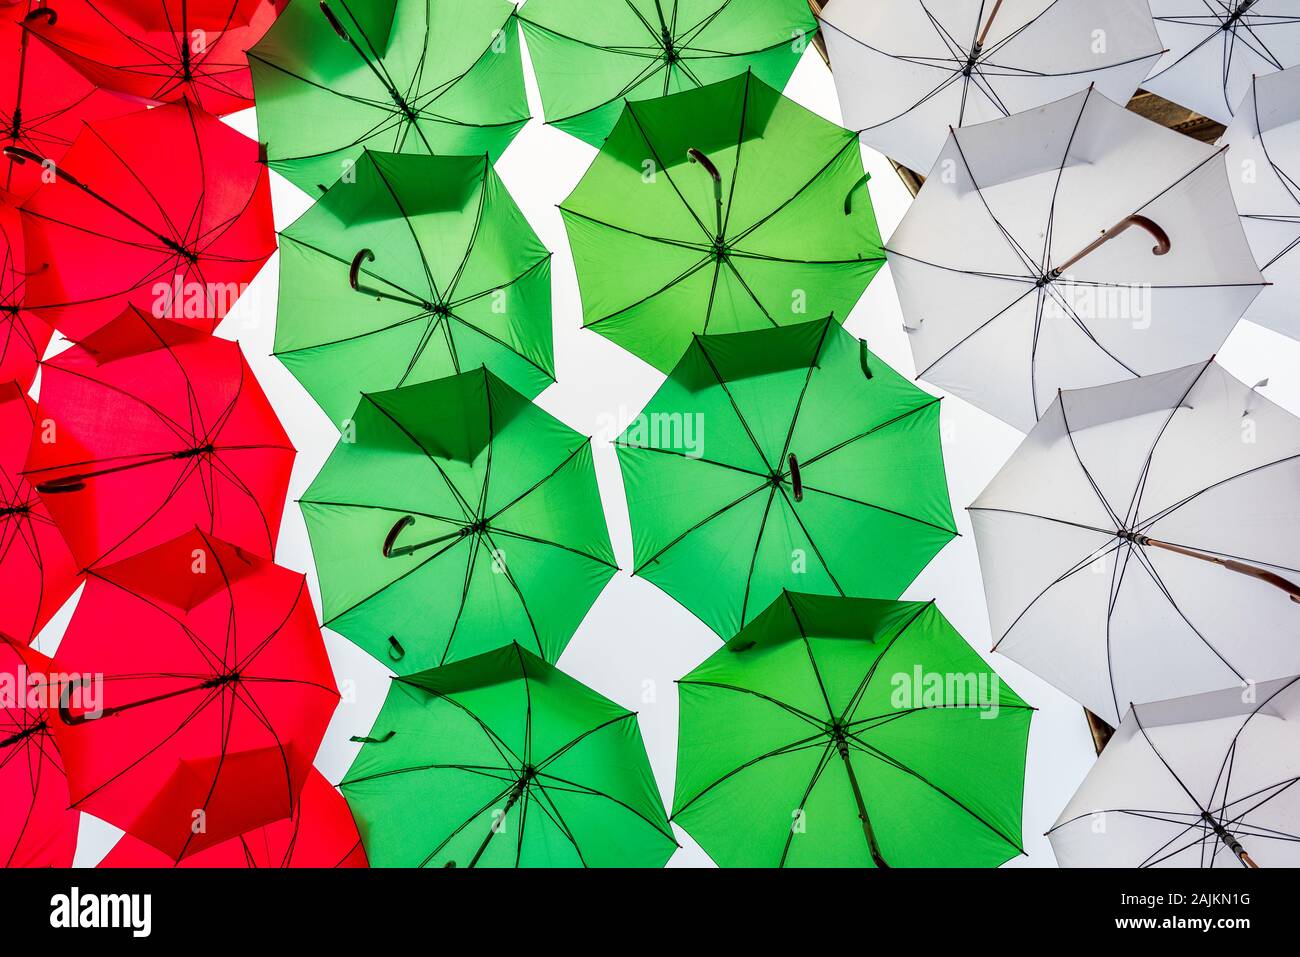 Colorful umbrellas with white, green, red colors from Bulgarian flag Stock Photo